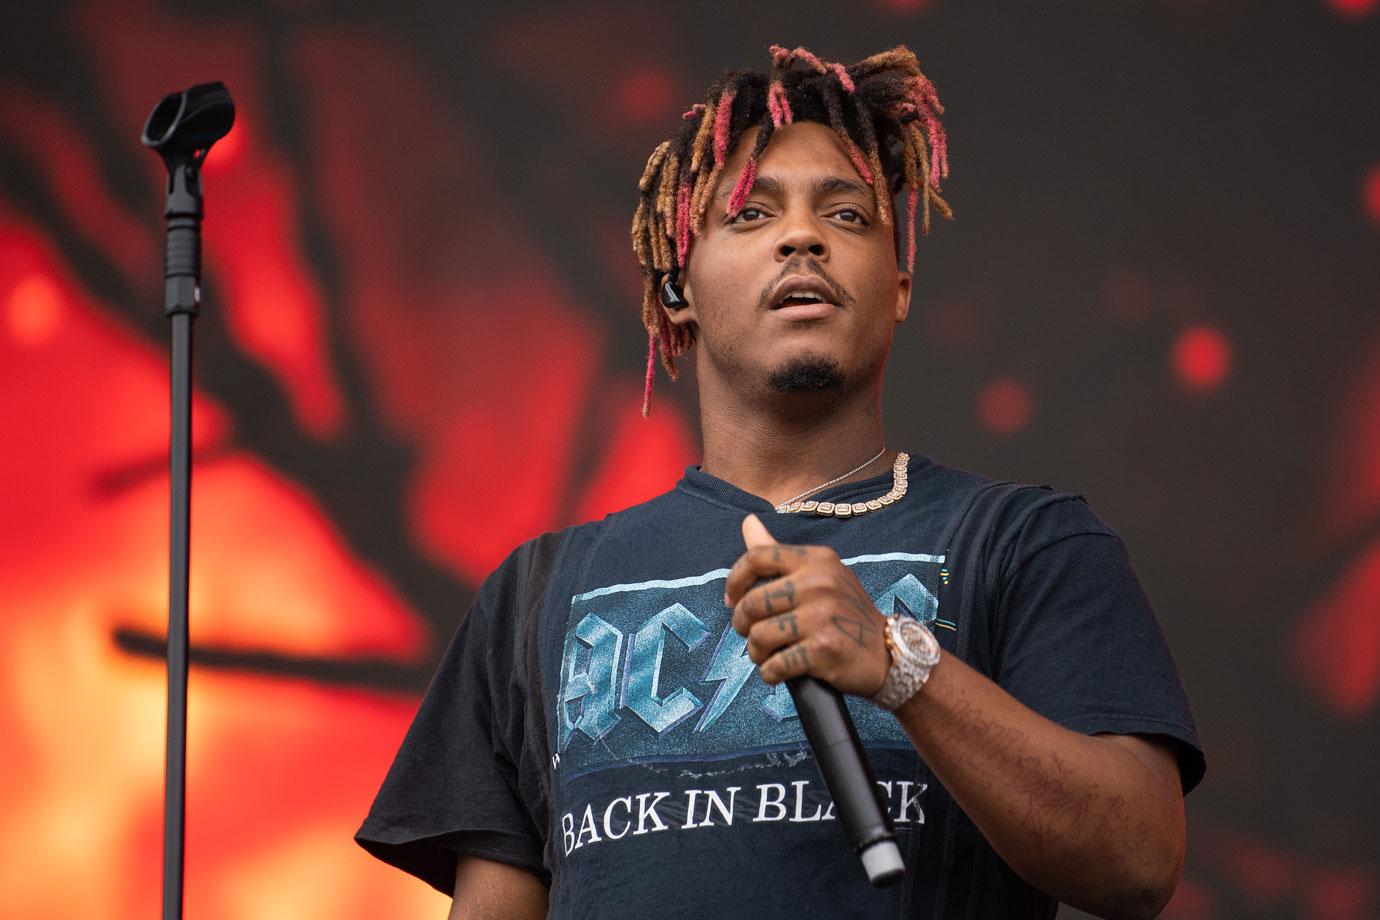 Rapper Juice WRLD dead after suffering medical emergency at Chicago's  Midway Airport - Good Morning America